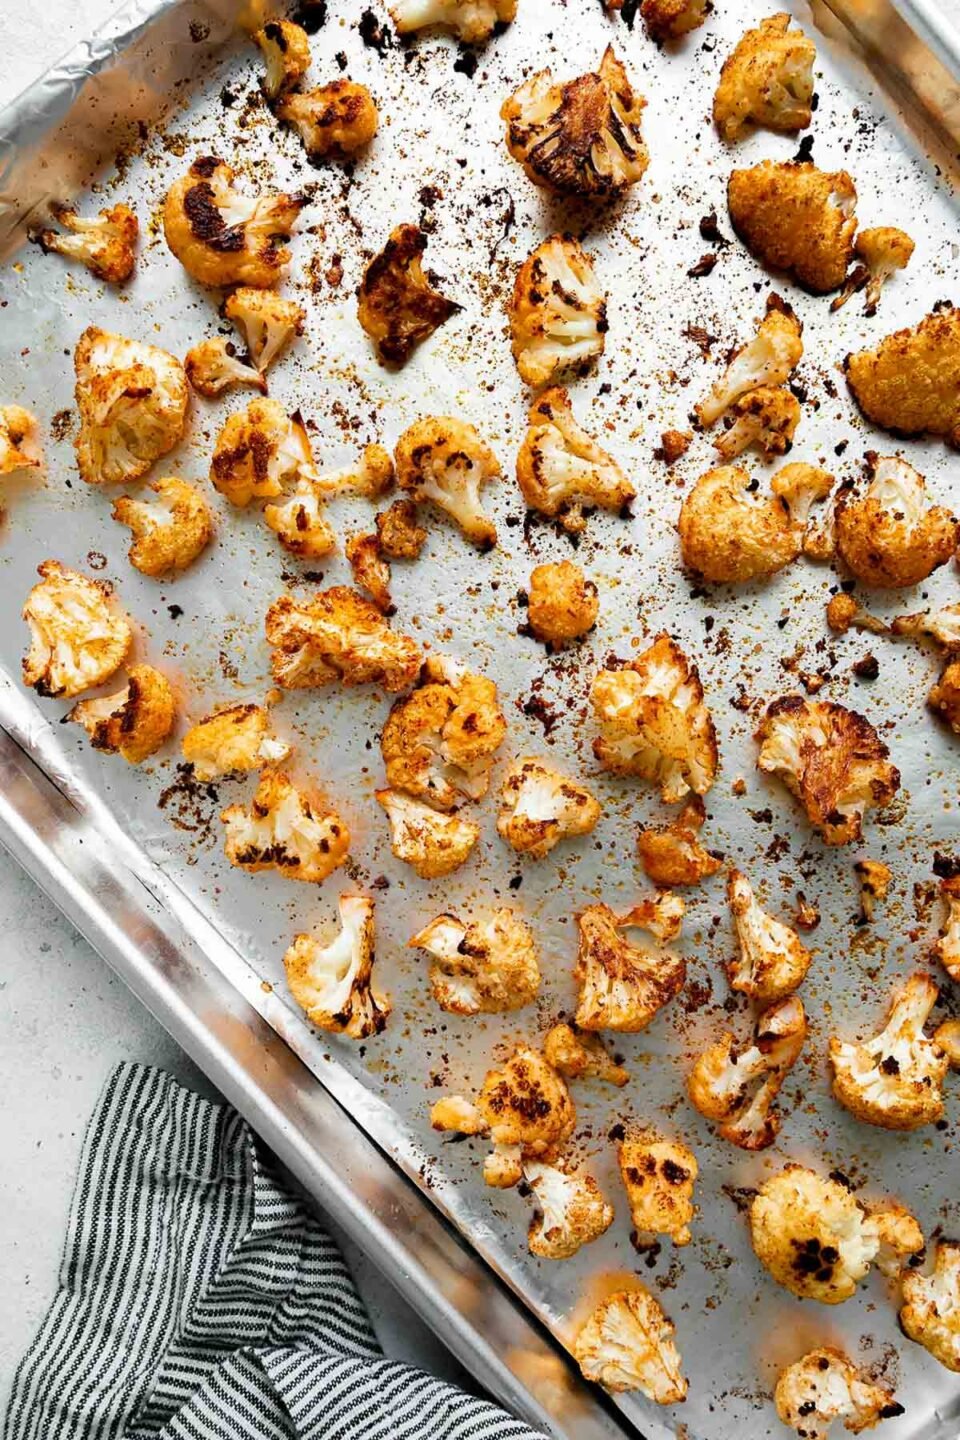 An overhead shot of how to make Hearty Buffalo Chicken Bowls, step 2: Roast the cauliflower. Roasted cauliflower arranged atop an aluminum foil lined baking sheet in a single layer. The cauliflower is roasted until golden brown. The baking sheet sits atop a creamy white textured surface with a blue and white striped linen napkin resting alongside.